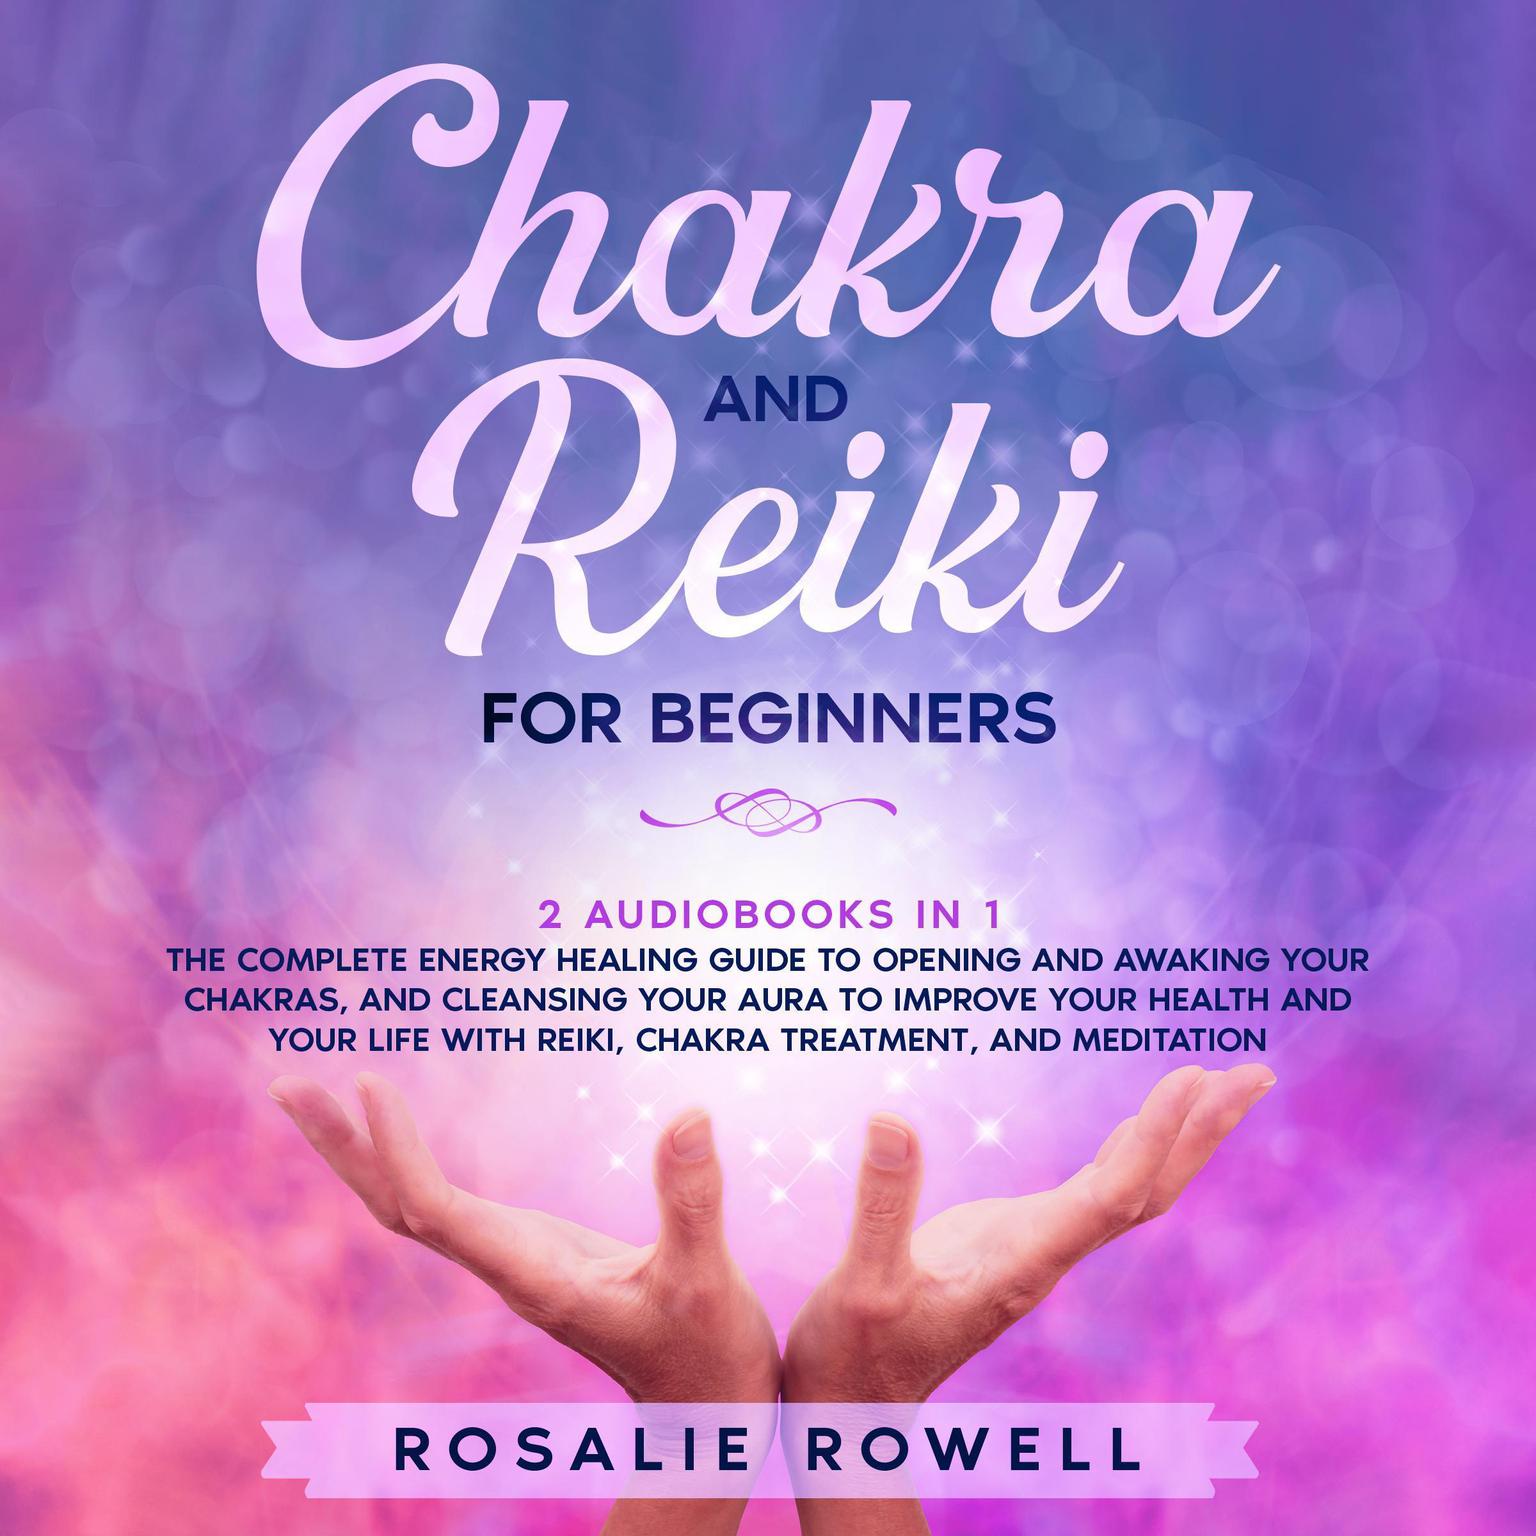 Chakra and Reiki for Beginners: 2 audiobooks in 1 - The Complete Energy Healing Guide to Opening and Awaking Your Chakras, and Cleansing Your Aura to Improve Your Health and Your Life With Reiki, Chakra Treatment, and Meditation Audiobook, by Rosalie Rowell